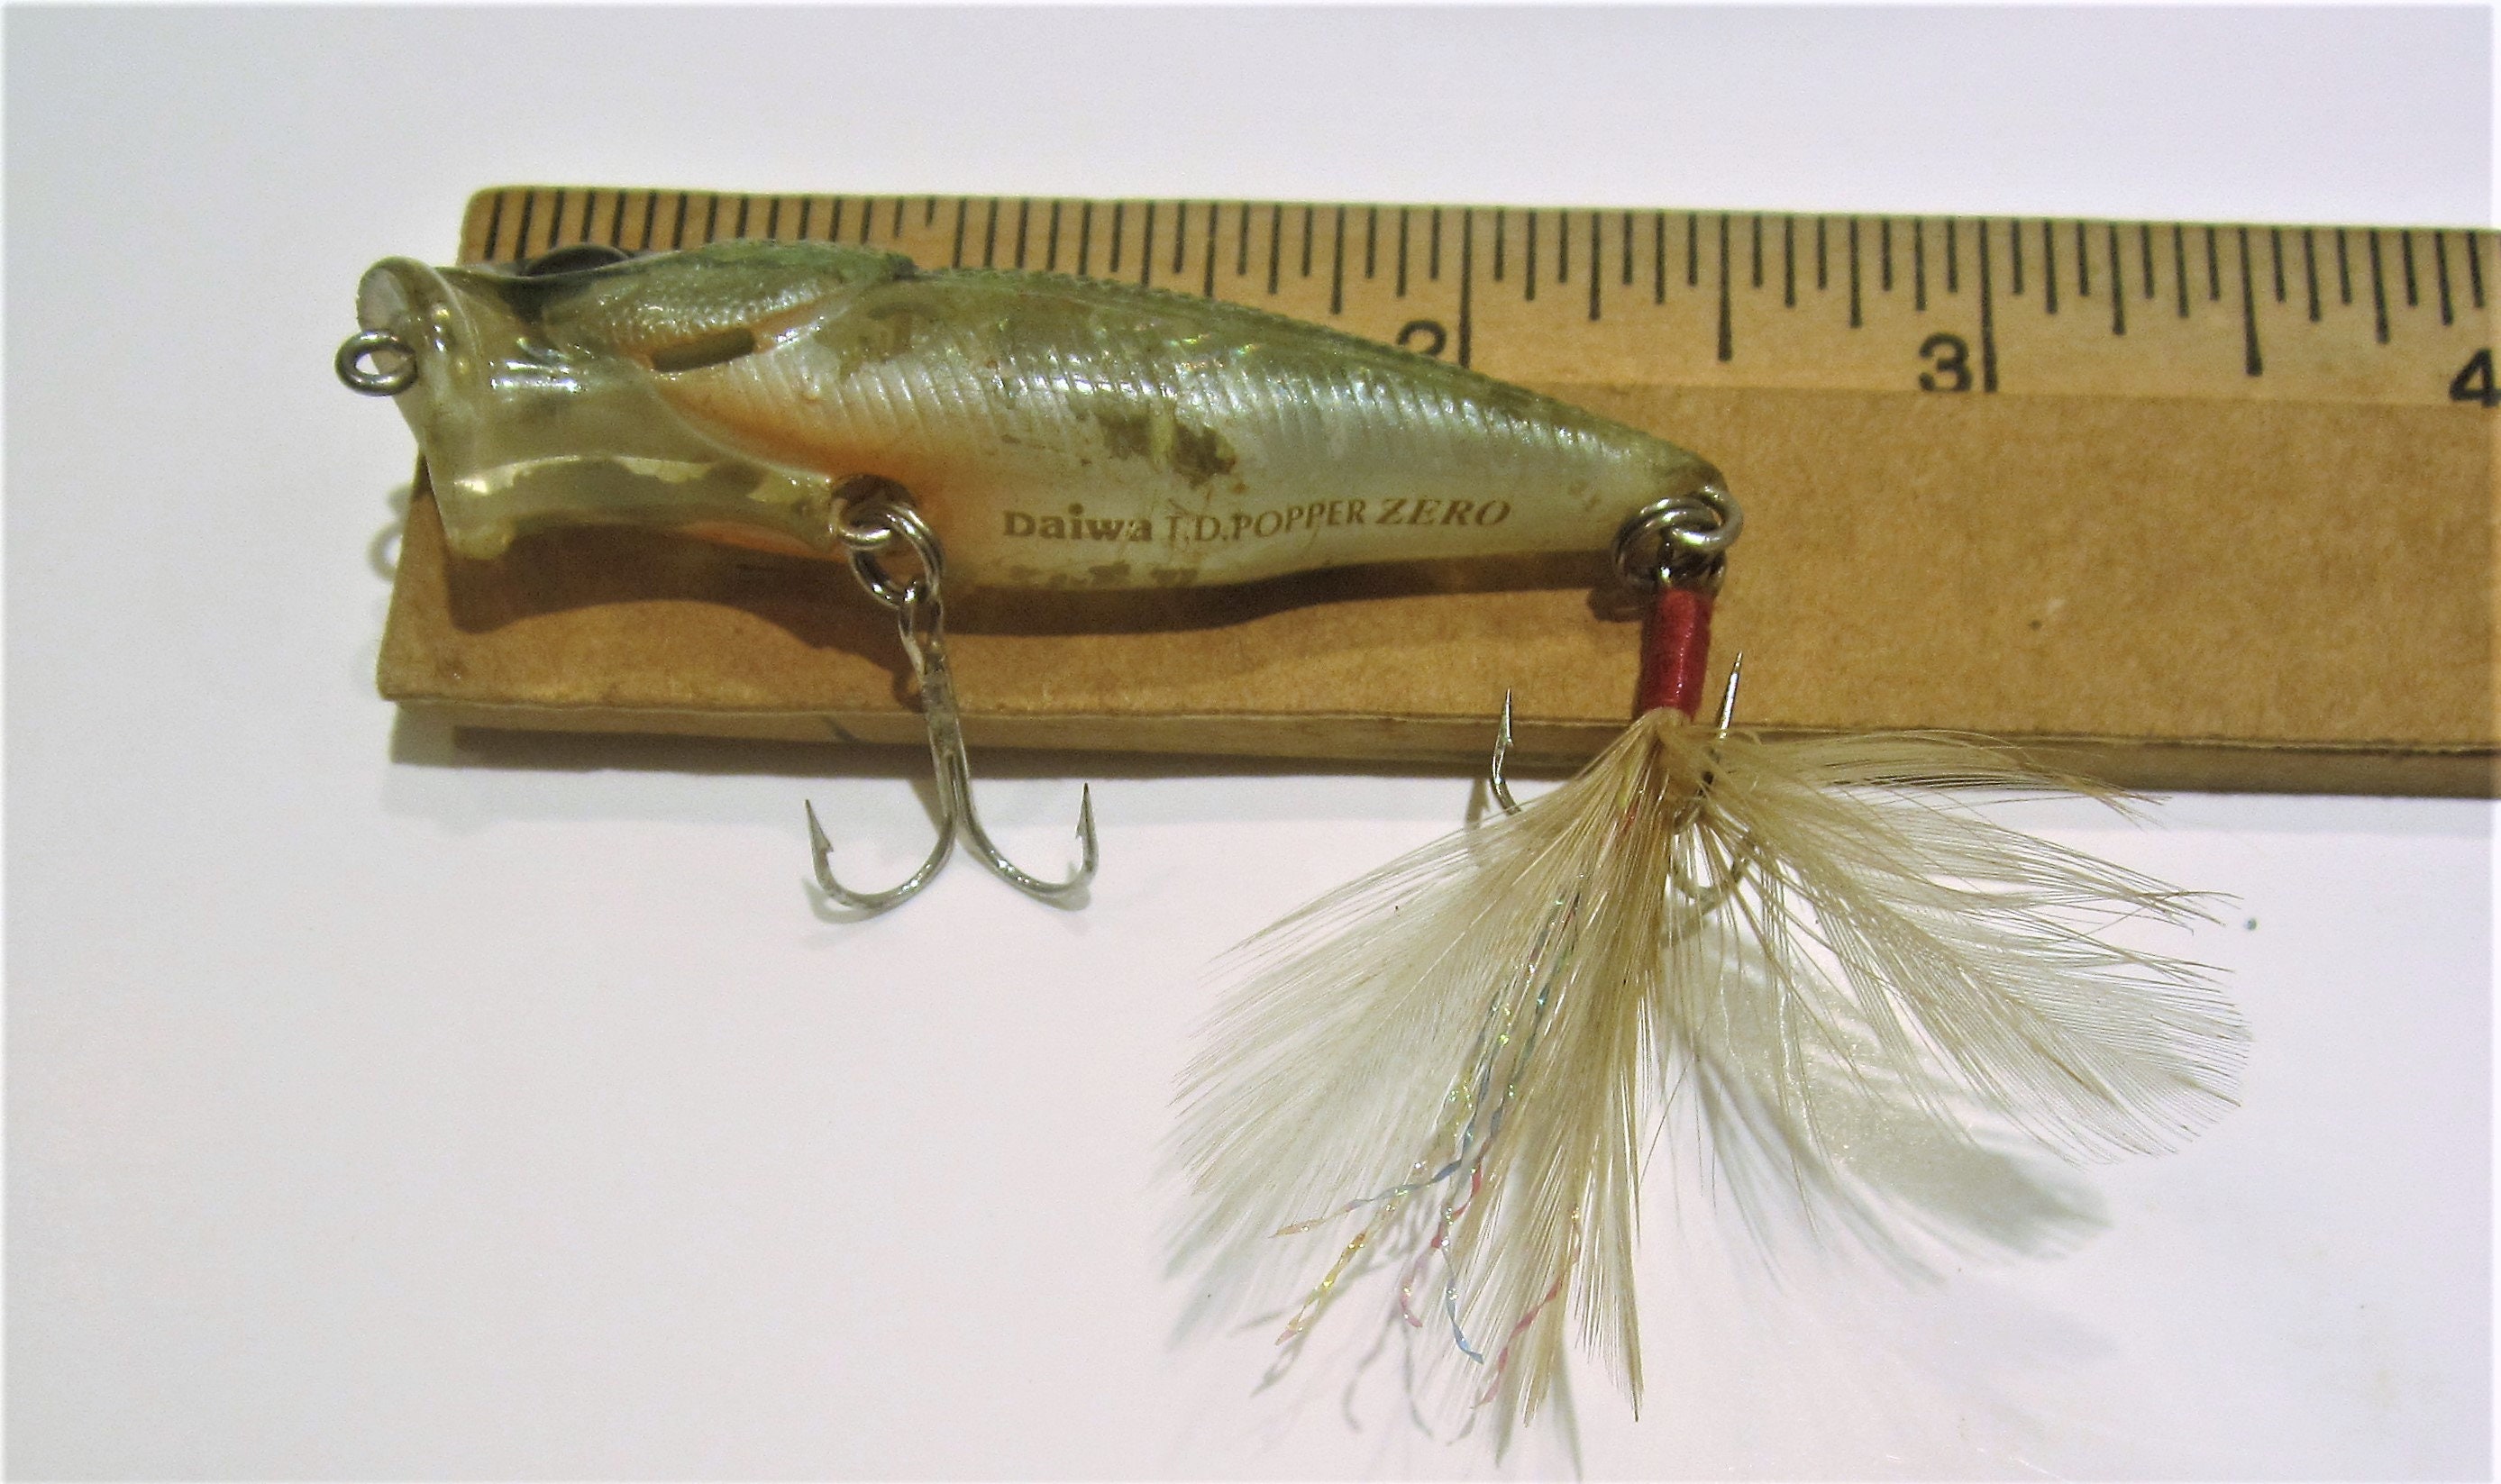 Daiwa T. D. Popper Zero Lure / Floating Lure with Rattle / Made in Japan /  All Original / Plastic Lure / Collectible / Great Gift Item